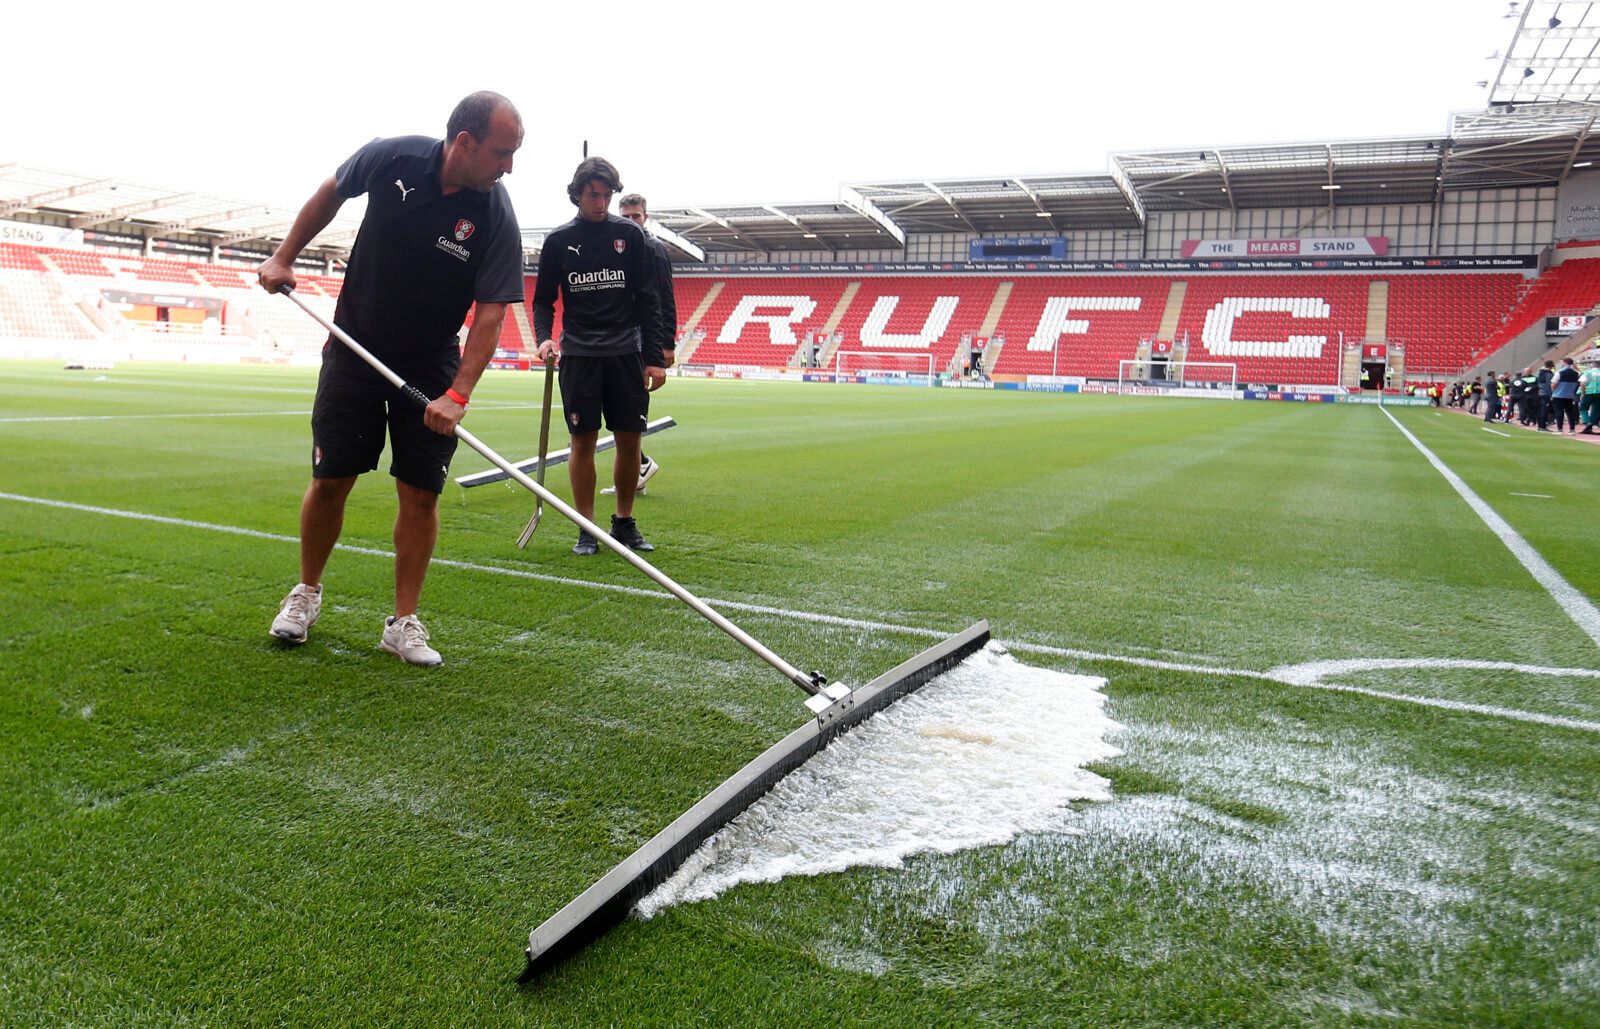 Soccer Football - Pre Season Friendly - Rotherham United v Newcastle United - AESSEAL New York Stadium, Rotherham, Britain - July 27, 2021 A member of groundstaff clears water from the side of the pitch before the match Action Images via Reuters/Ed Sykes